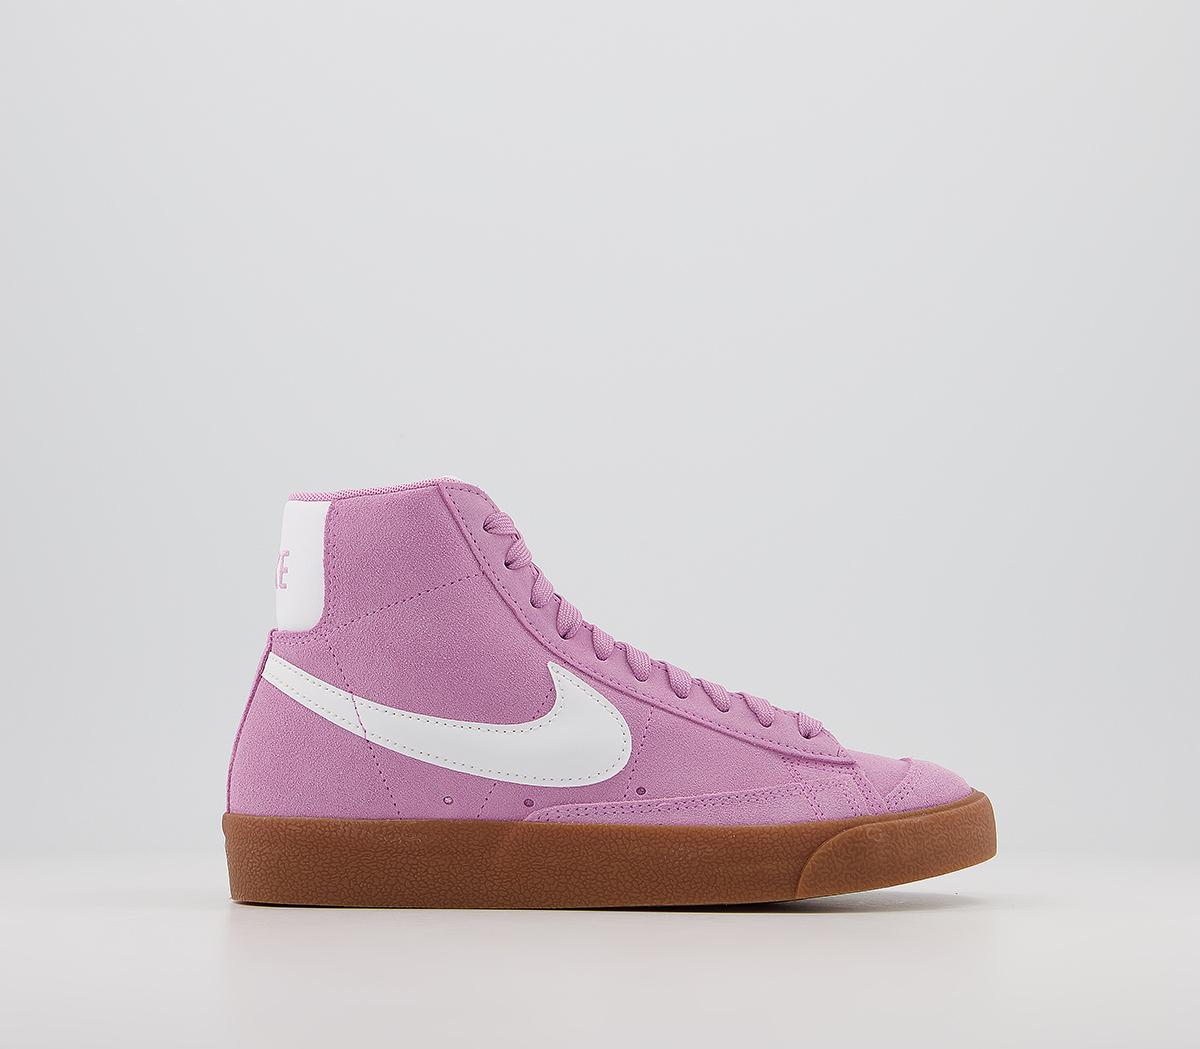 Nike Blazer Mid 77 Trainers Suede Beyond Pink White Gum Brown - Hers ...